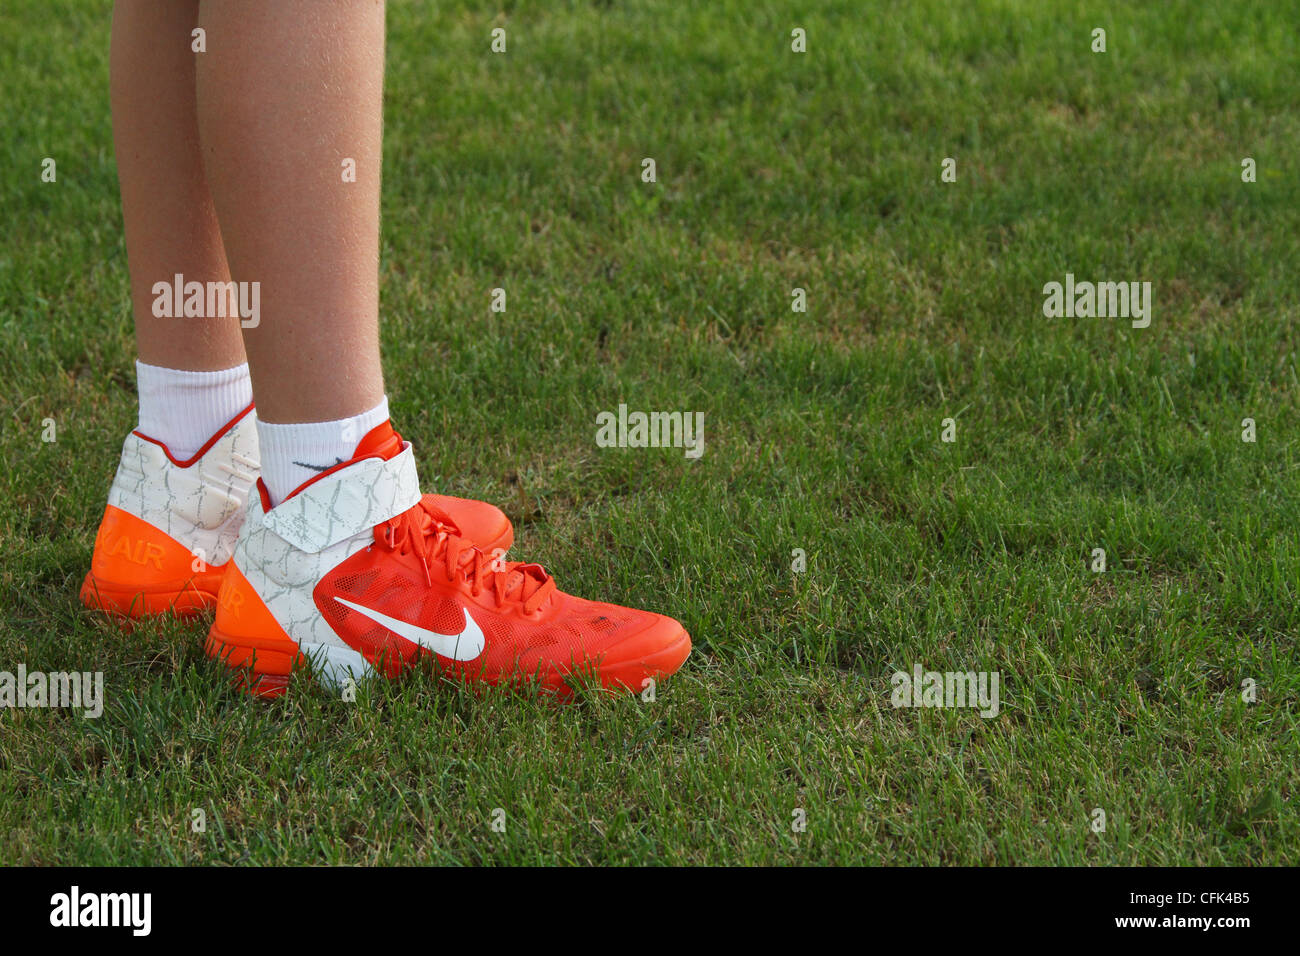 Nike sport shoes worn by teenage boy. Some dirt visible. Stock Photo